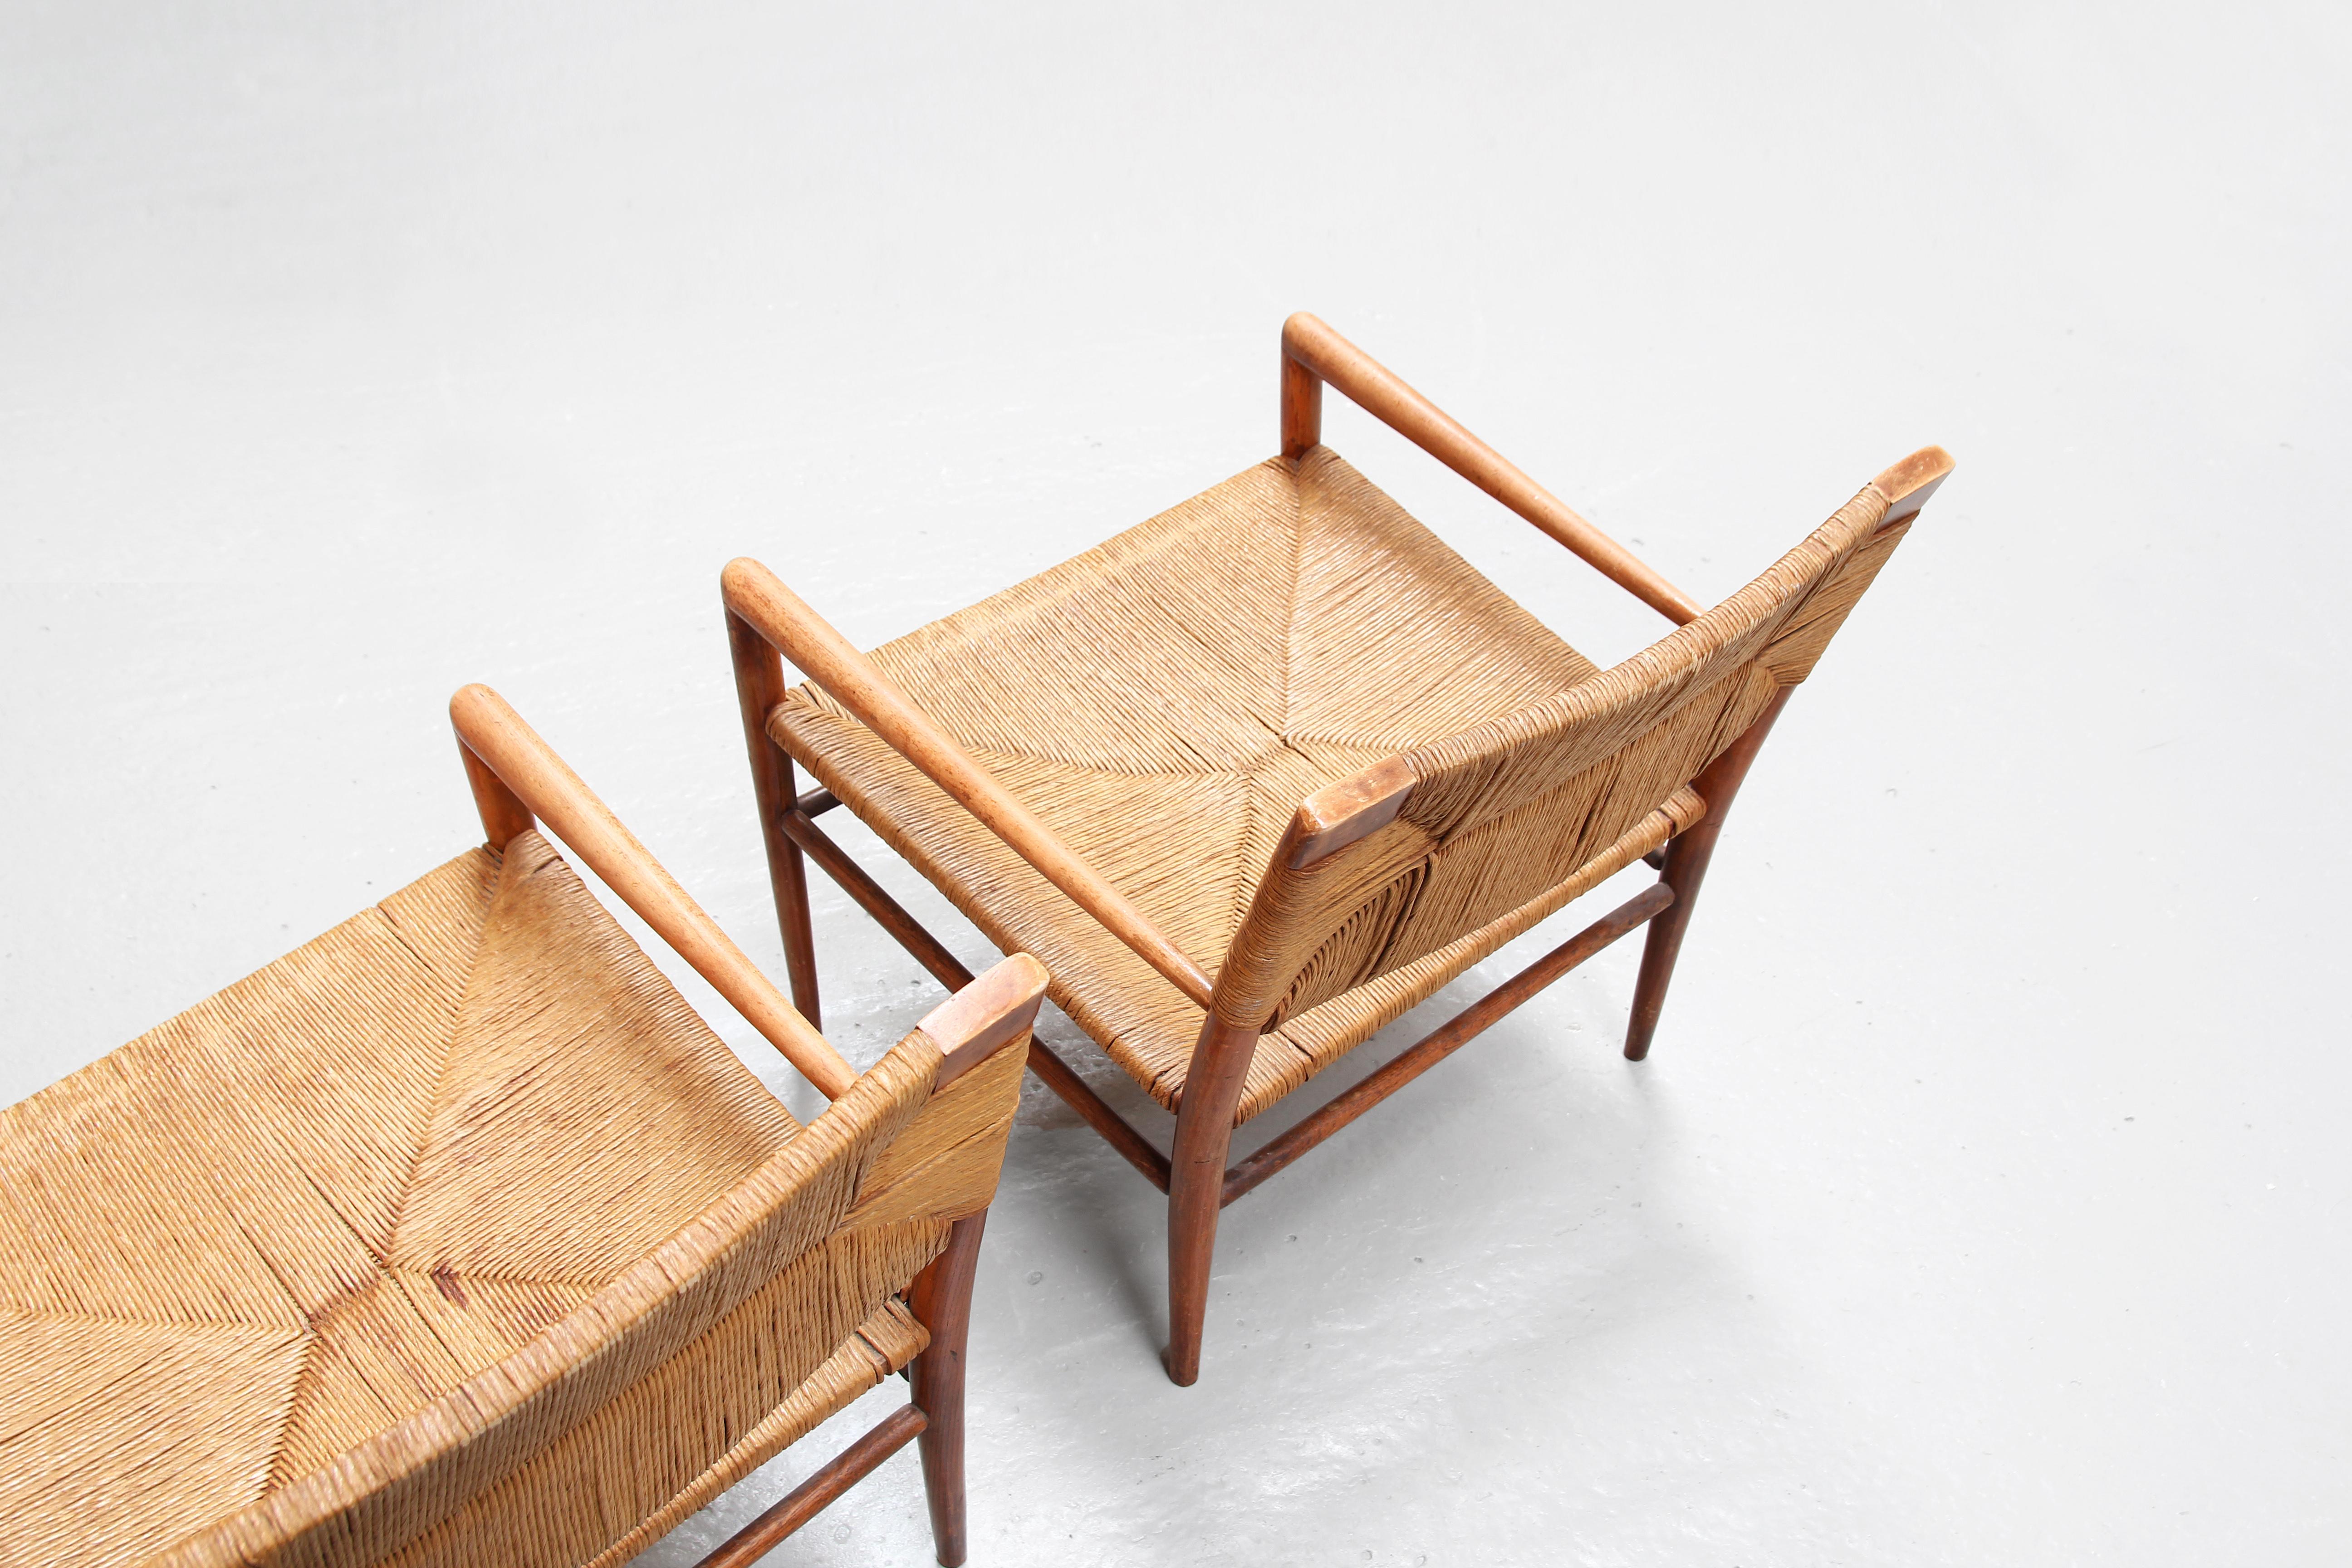 Beech Pair of American Lounge Chairs by Mel Smilow for Smilow-Thielle 1950ies